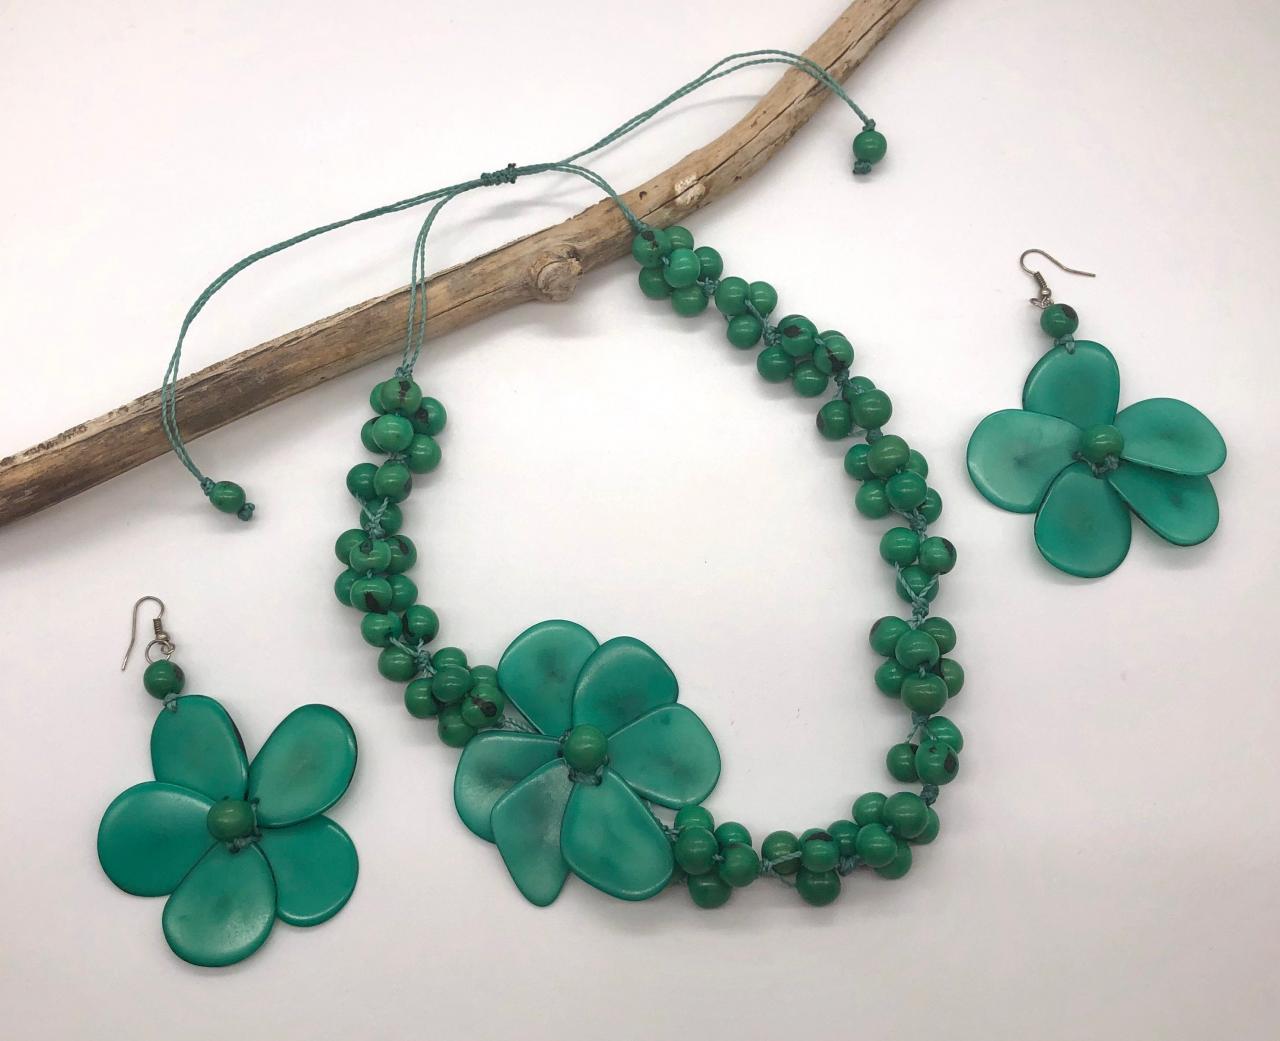 Jade Green Tagua Necklace And Earrings, Statement Necklace, Summer Necklace, Vegan Necklace, Beach Necklace, Flower Necklace, Exotic Neck